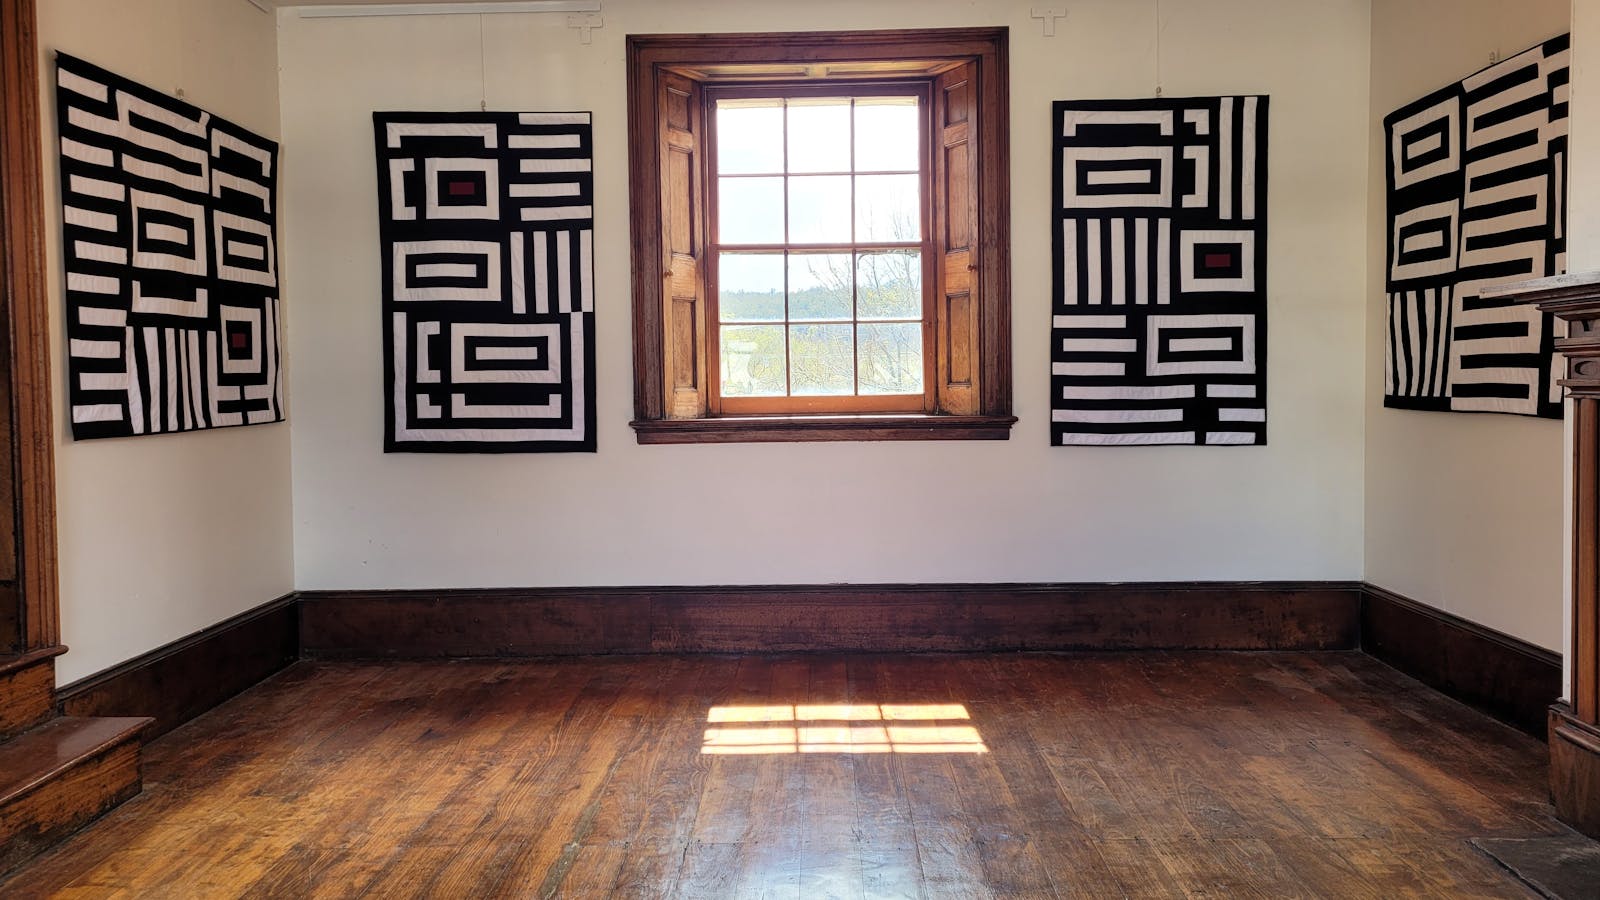 Exhibition space - Glen Murray, 'Nothing is ever just black and white' in the parlour gallery.